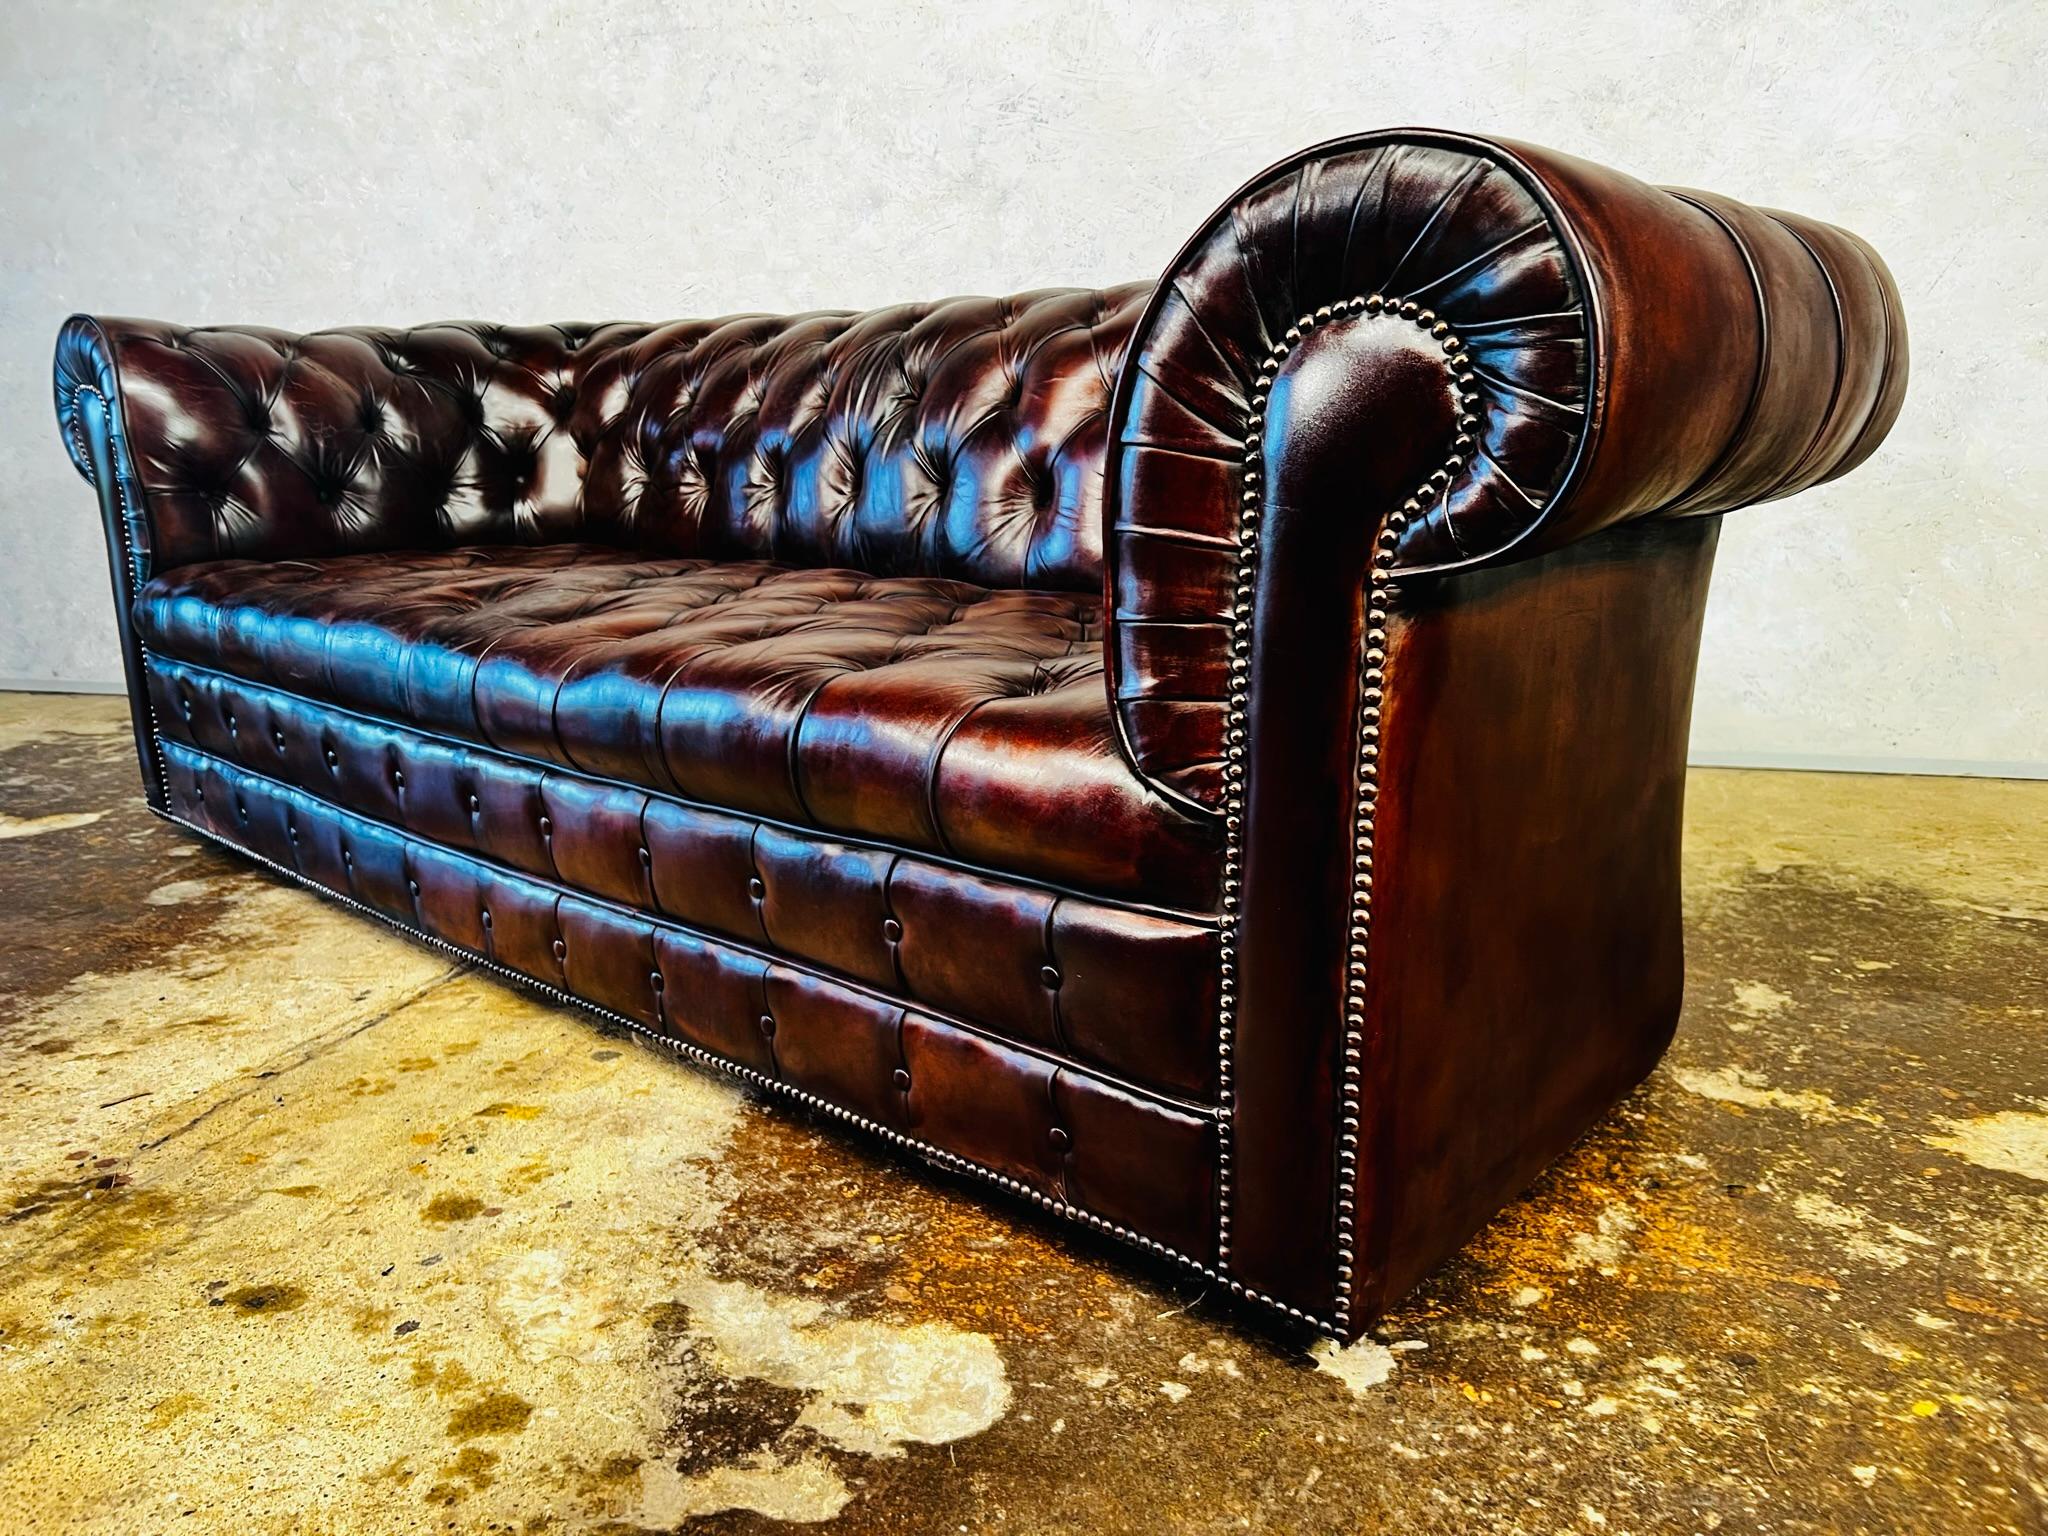 20th Century Exceptional English Fully Buttoned Patinated Leather Chesterfield Sofa #390 For Sale